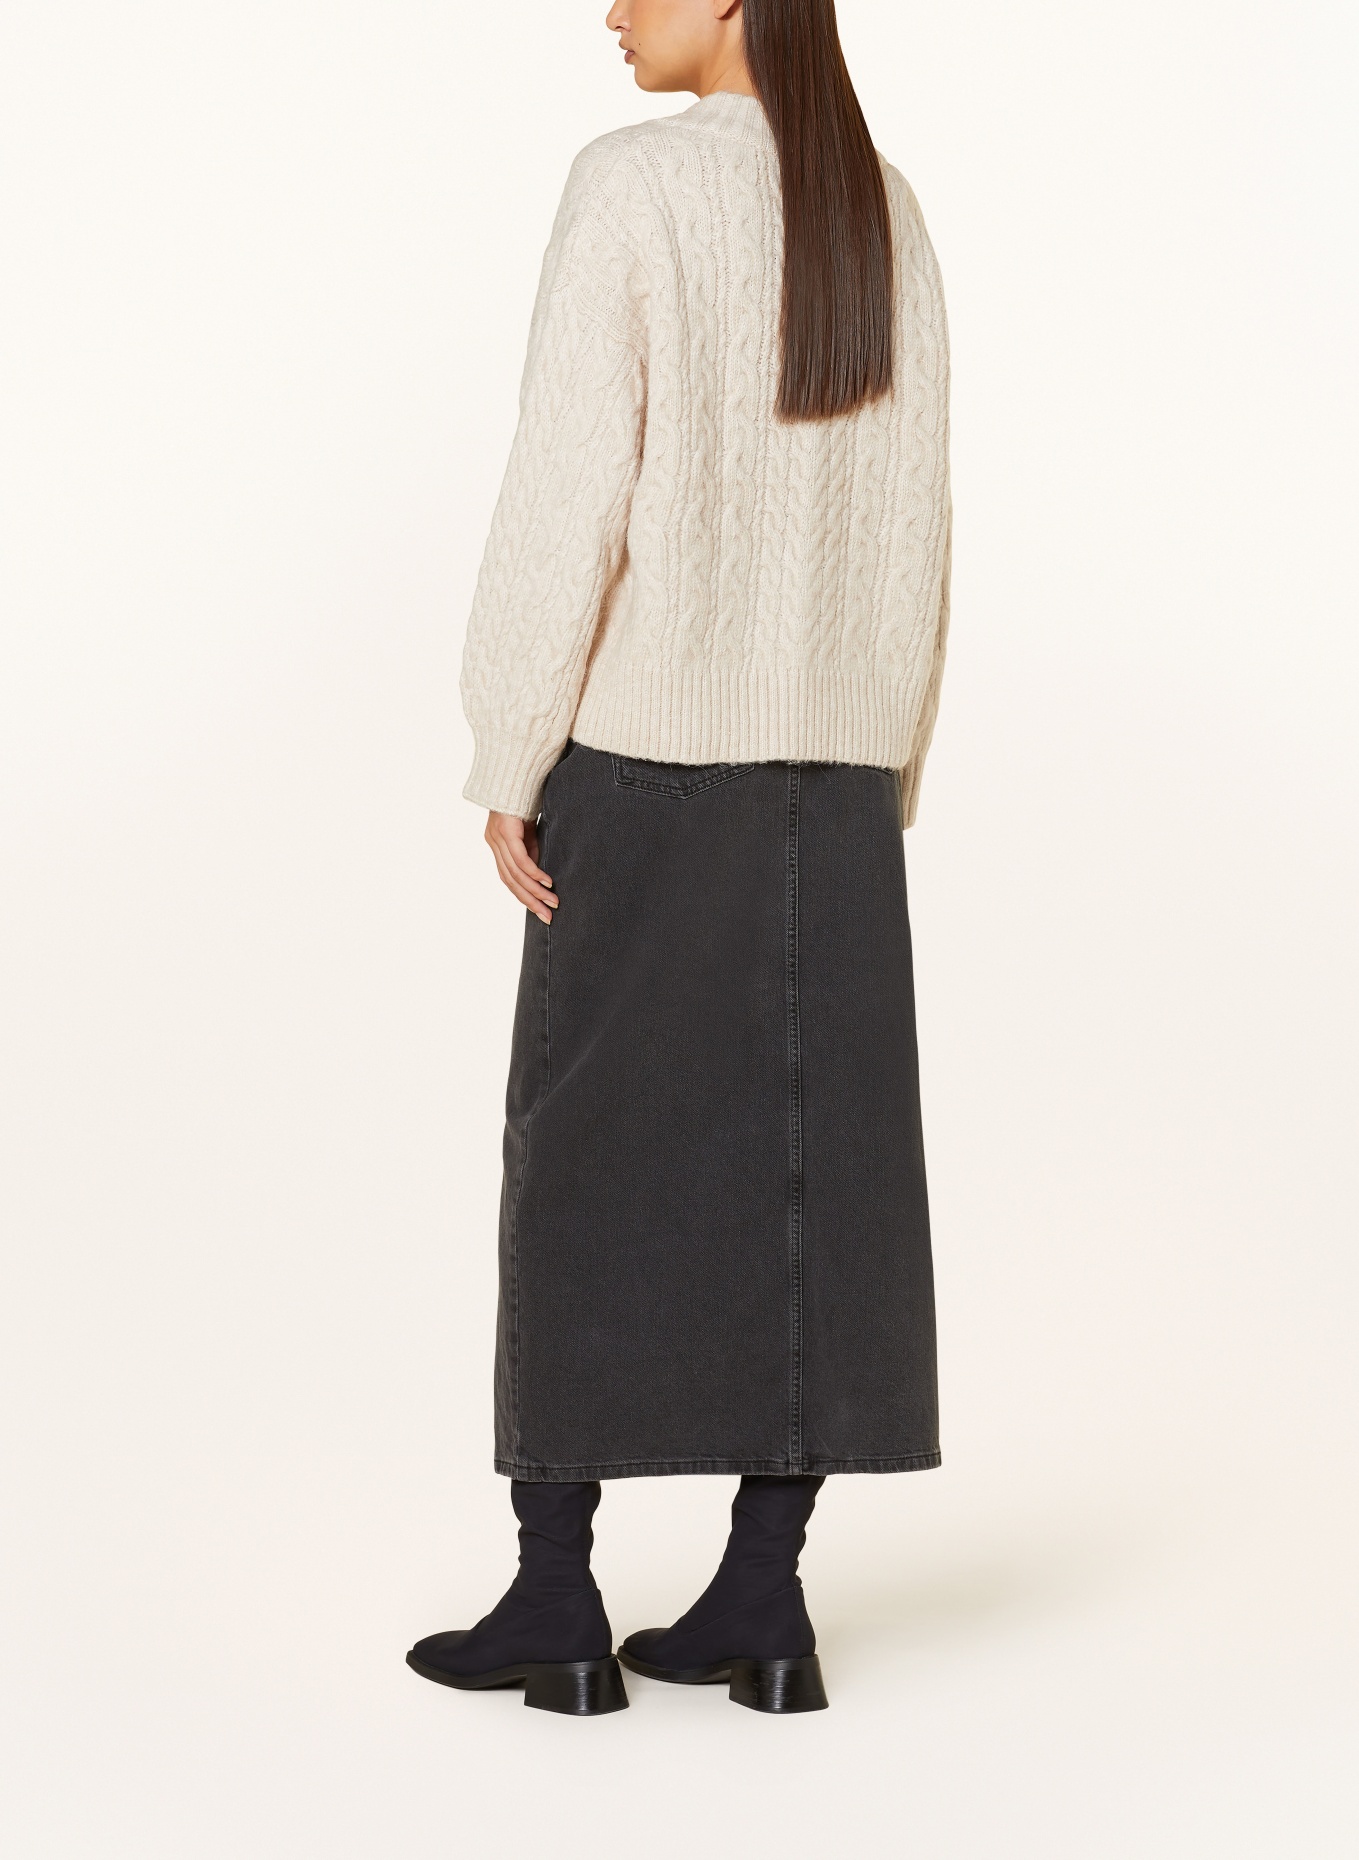 gina tricot Oversized sweater, Color: BEIGE (Image 3)